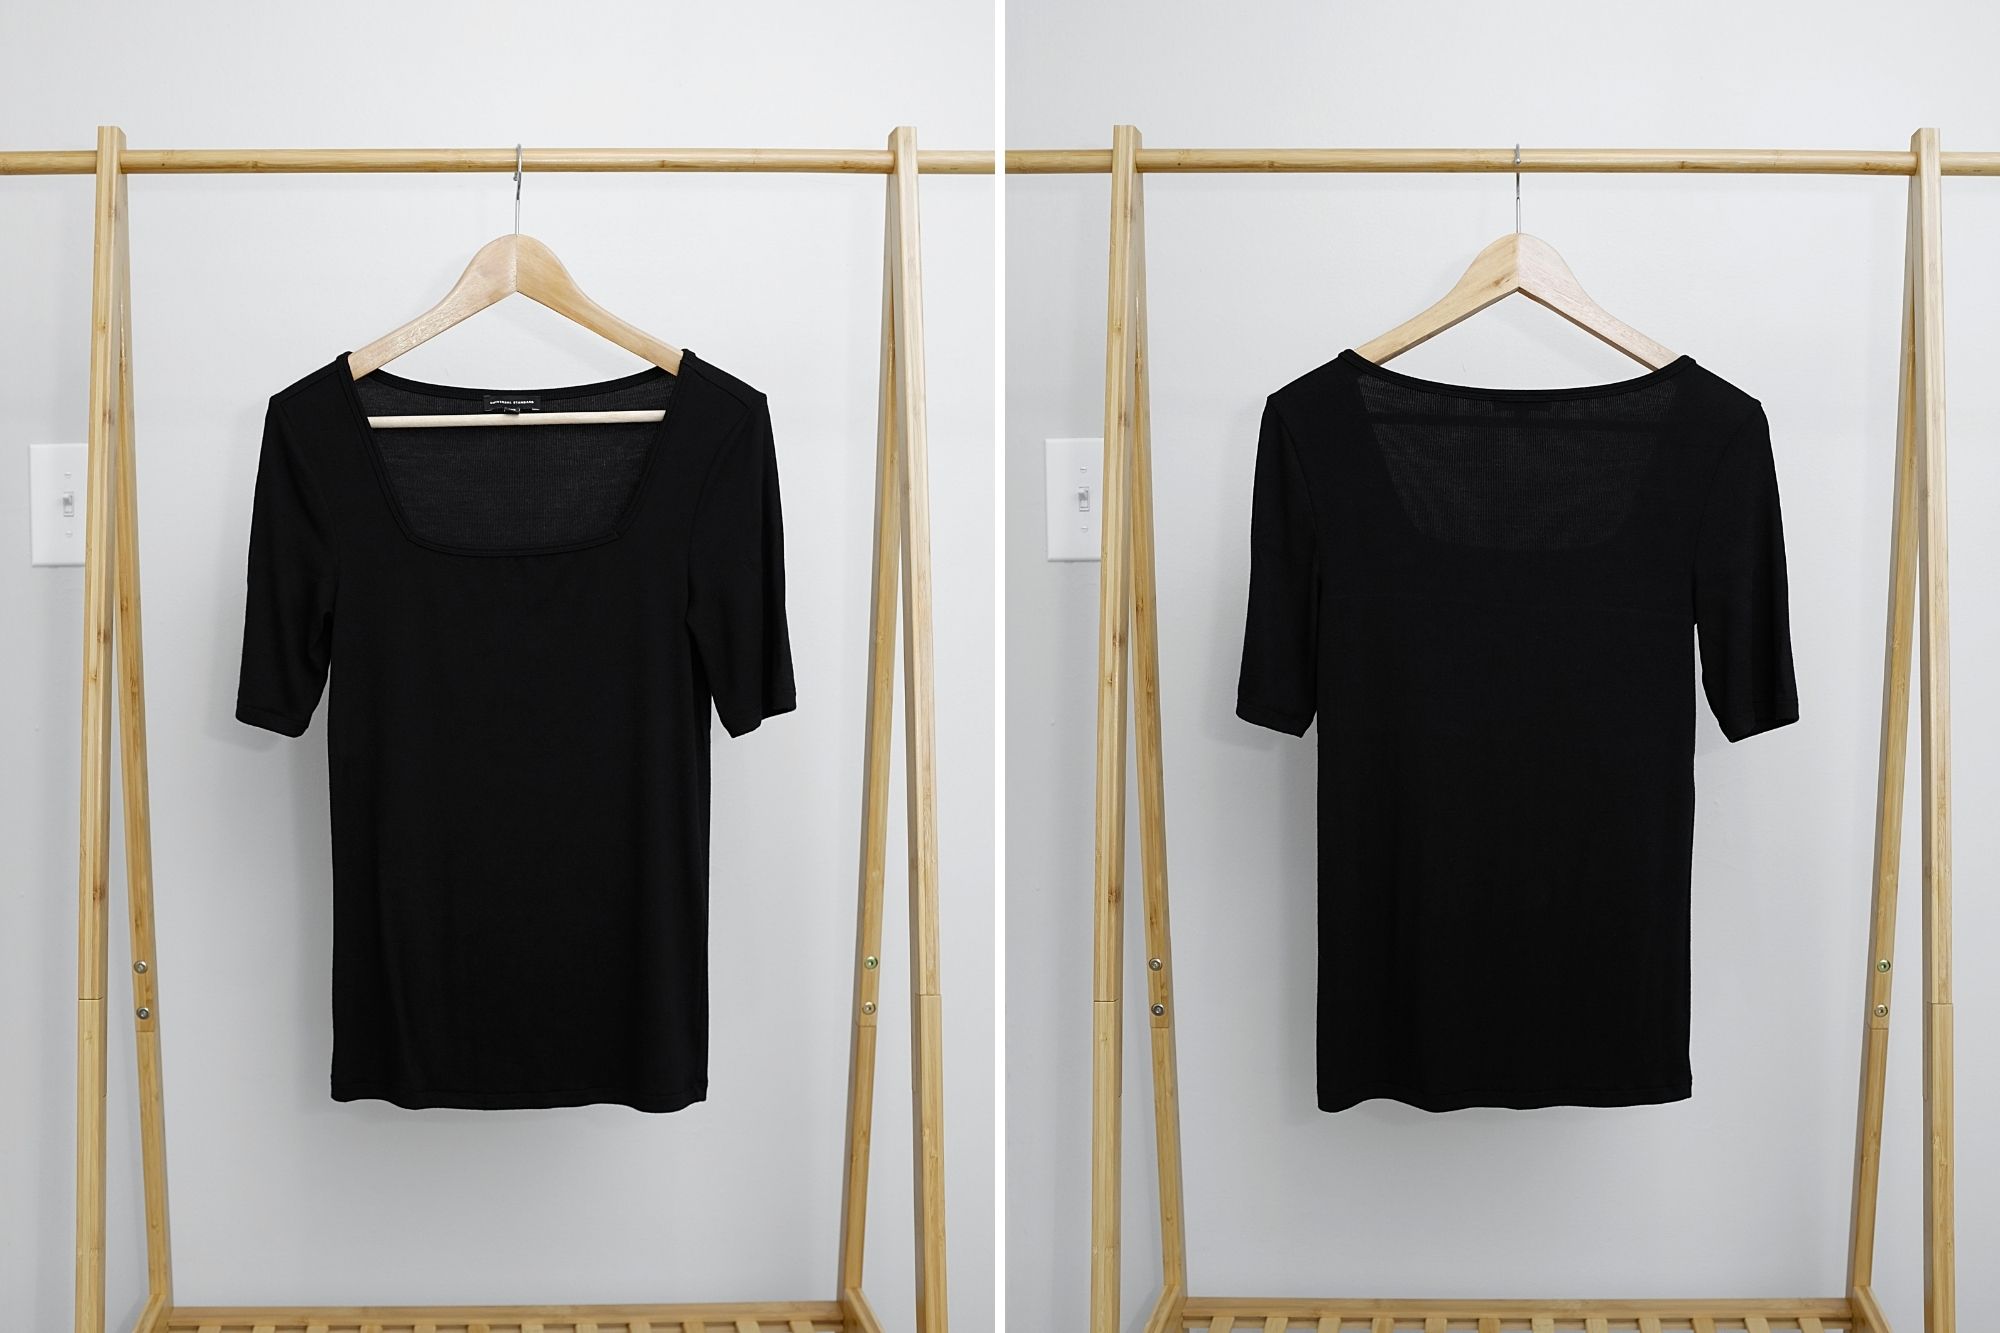 The Foundation Short Sleeve Square Neck Tee hangs on a hanger, front and back